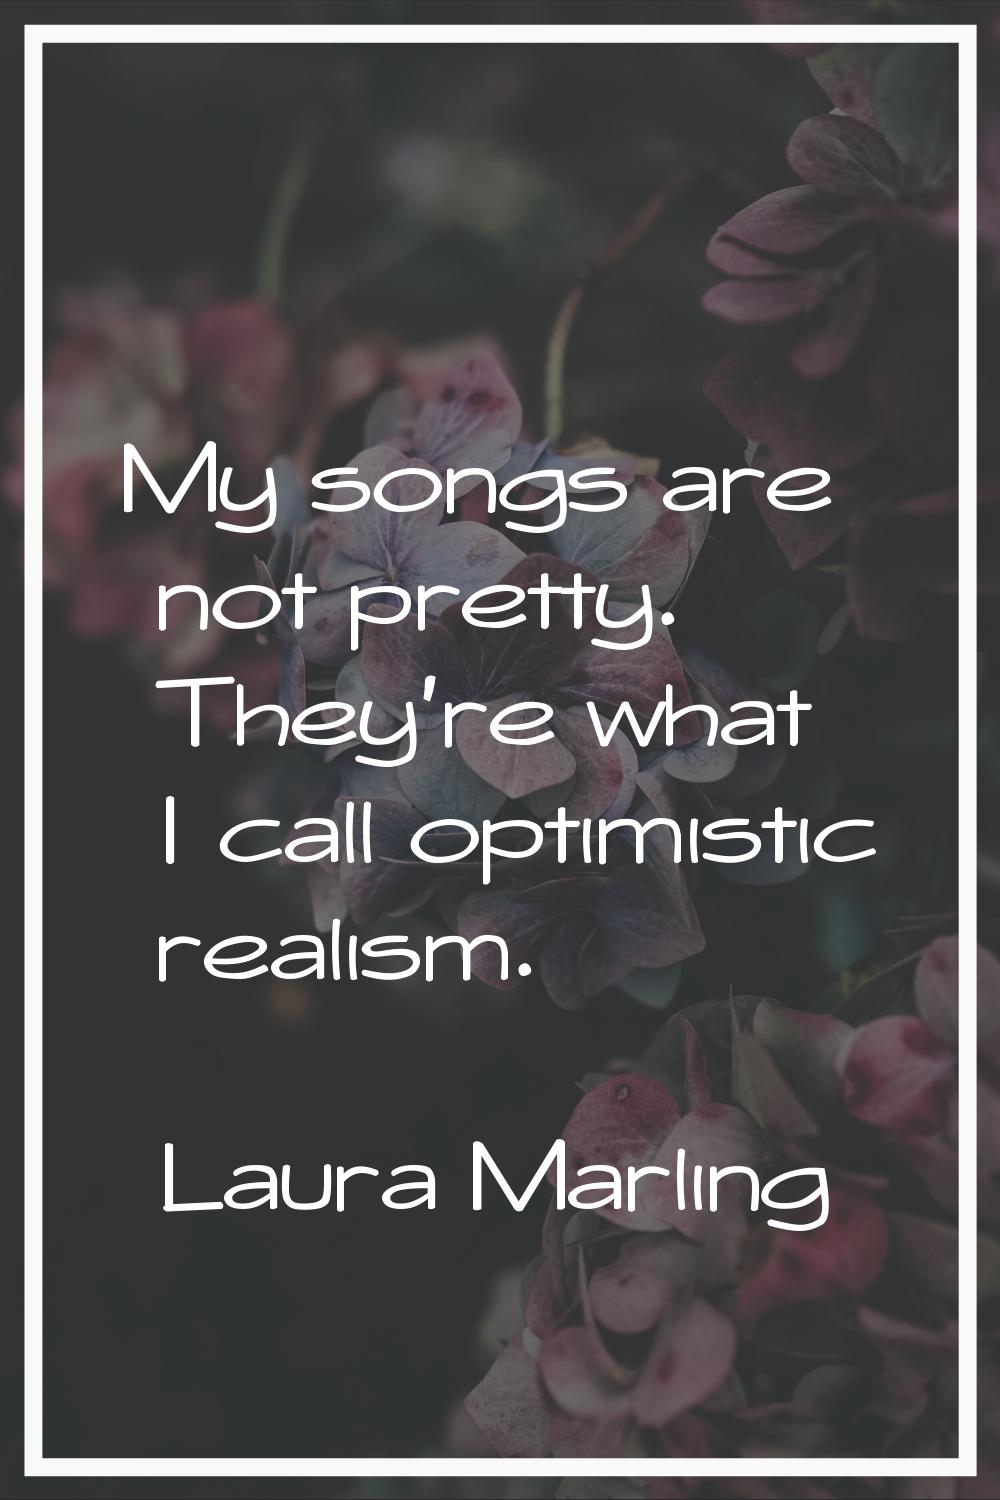 My songs are not pretty. They're what I call optimistic realism.